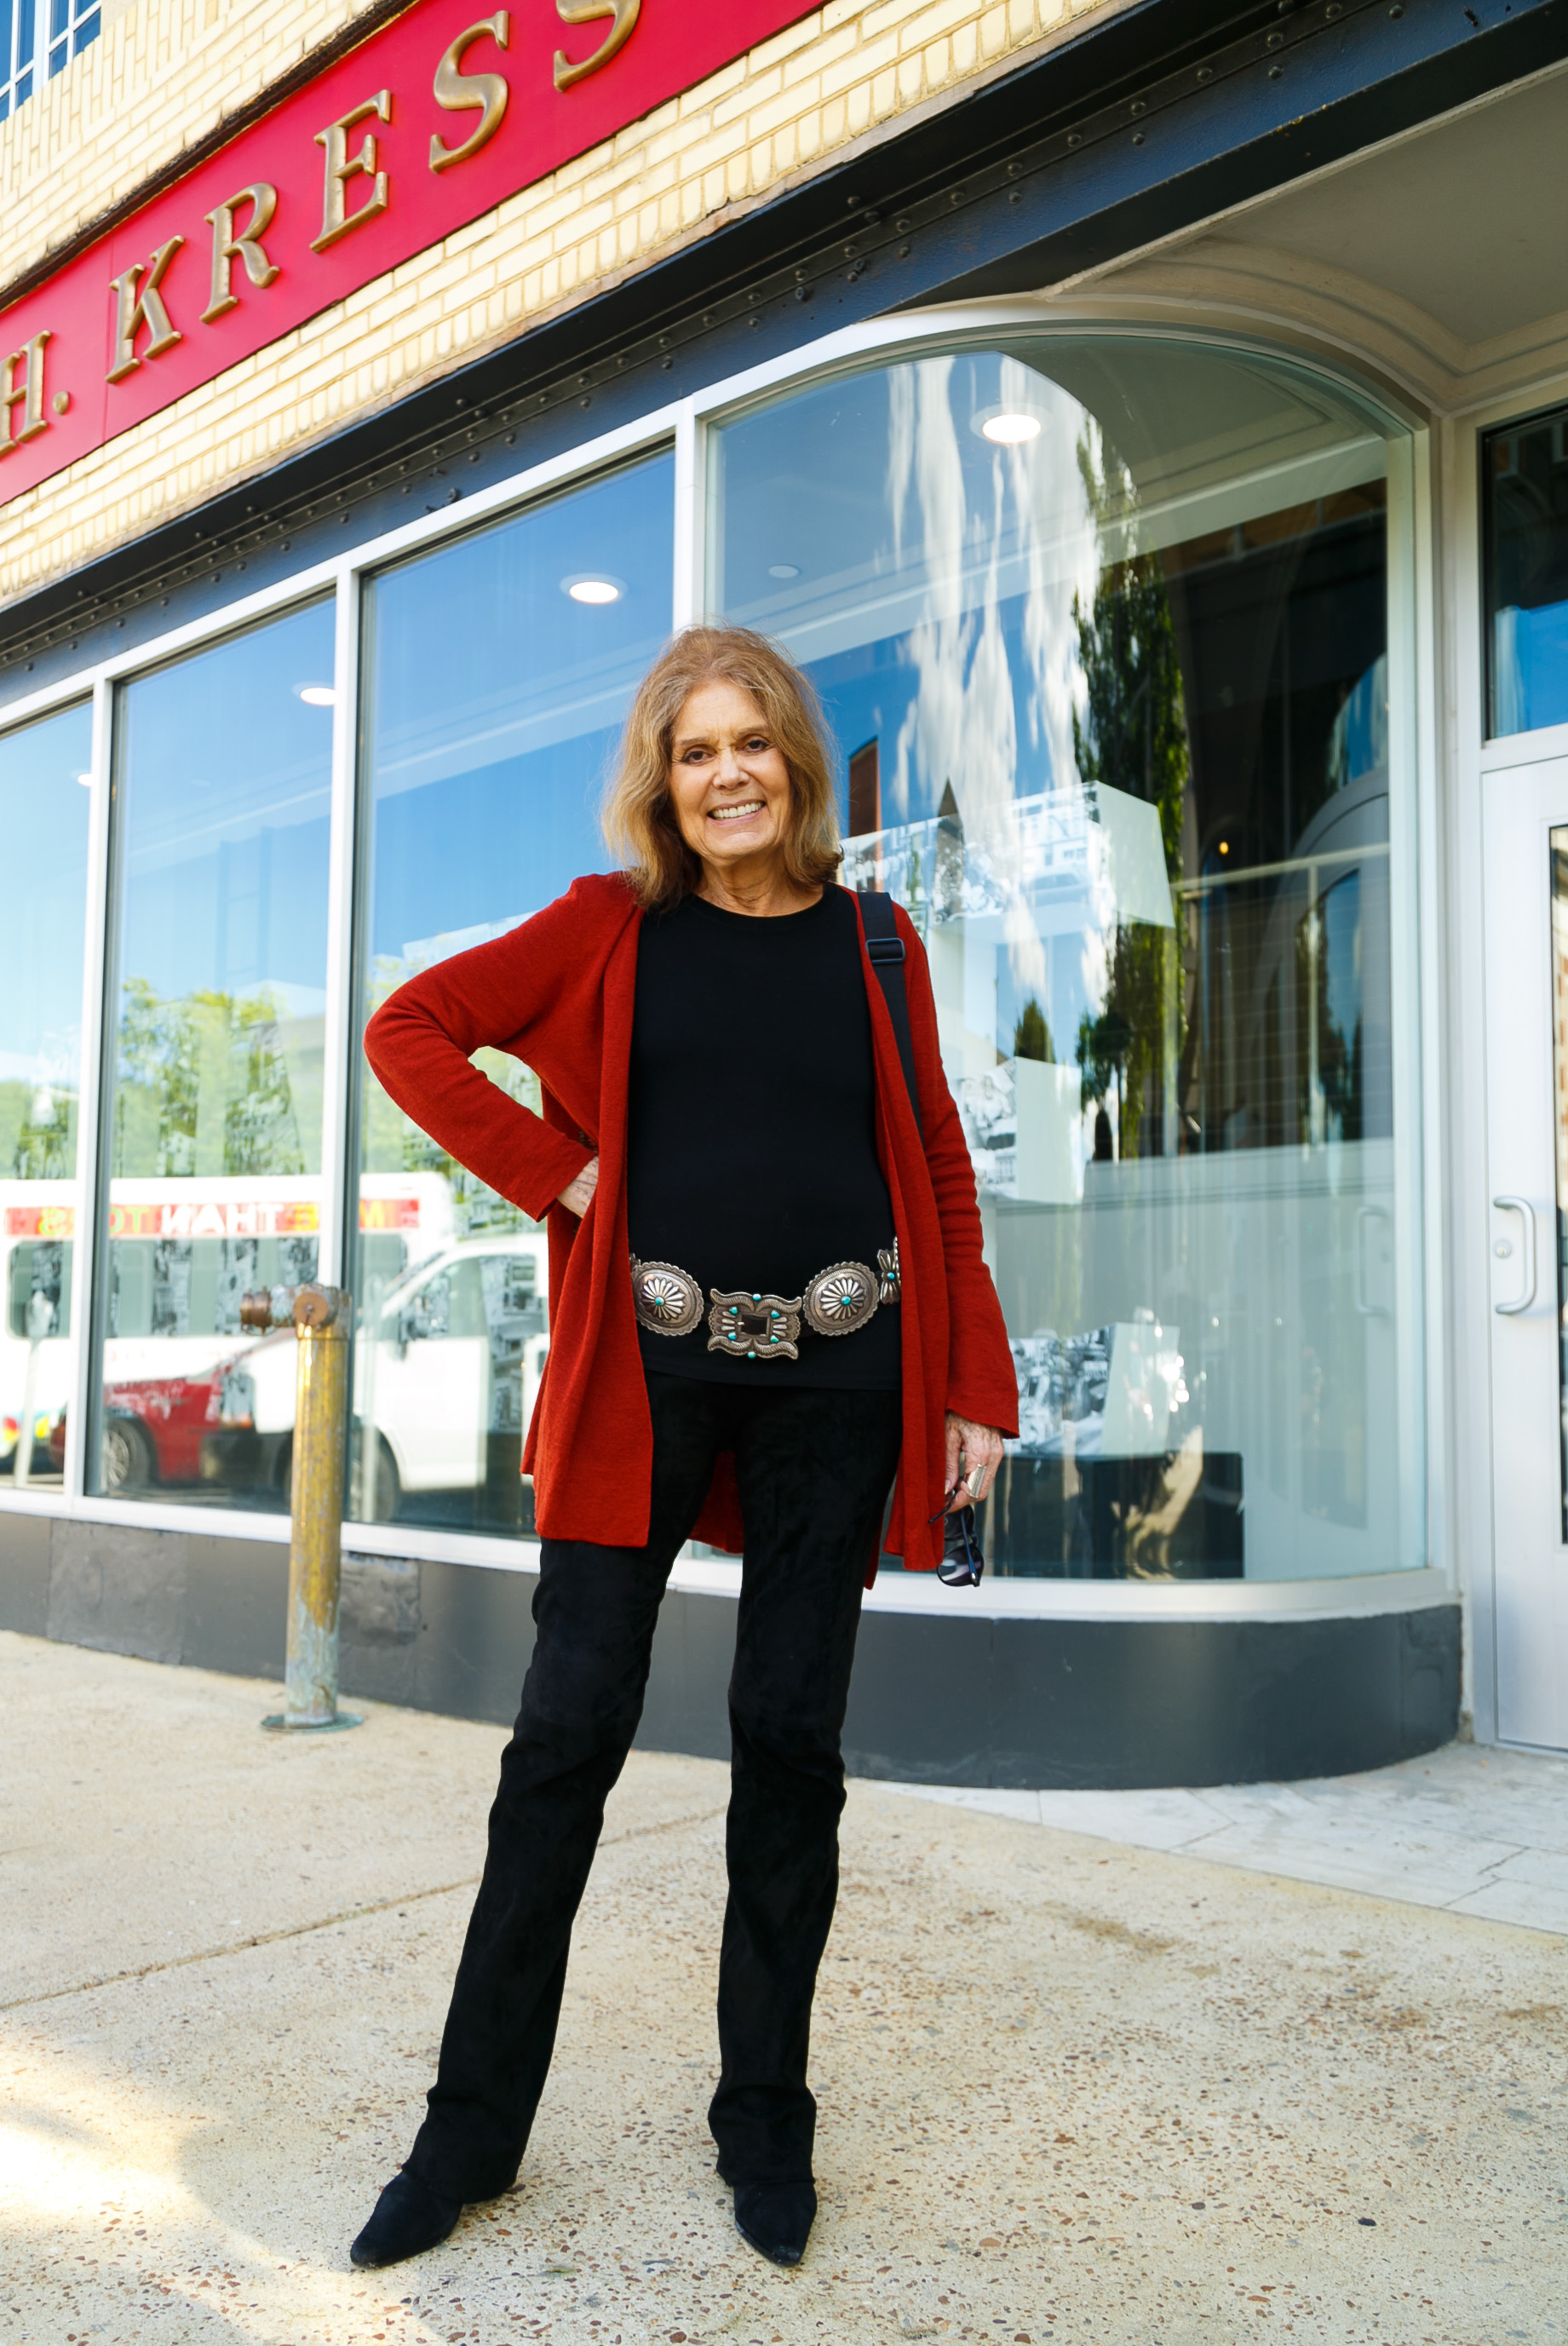  Legend Gloria Steinem tours  This is where you’ll find me + STORYBOOTH.  